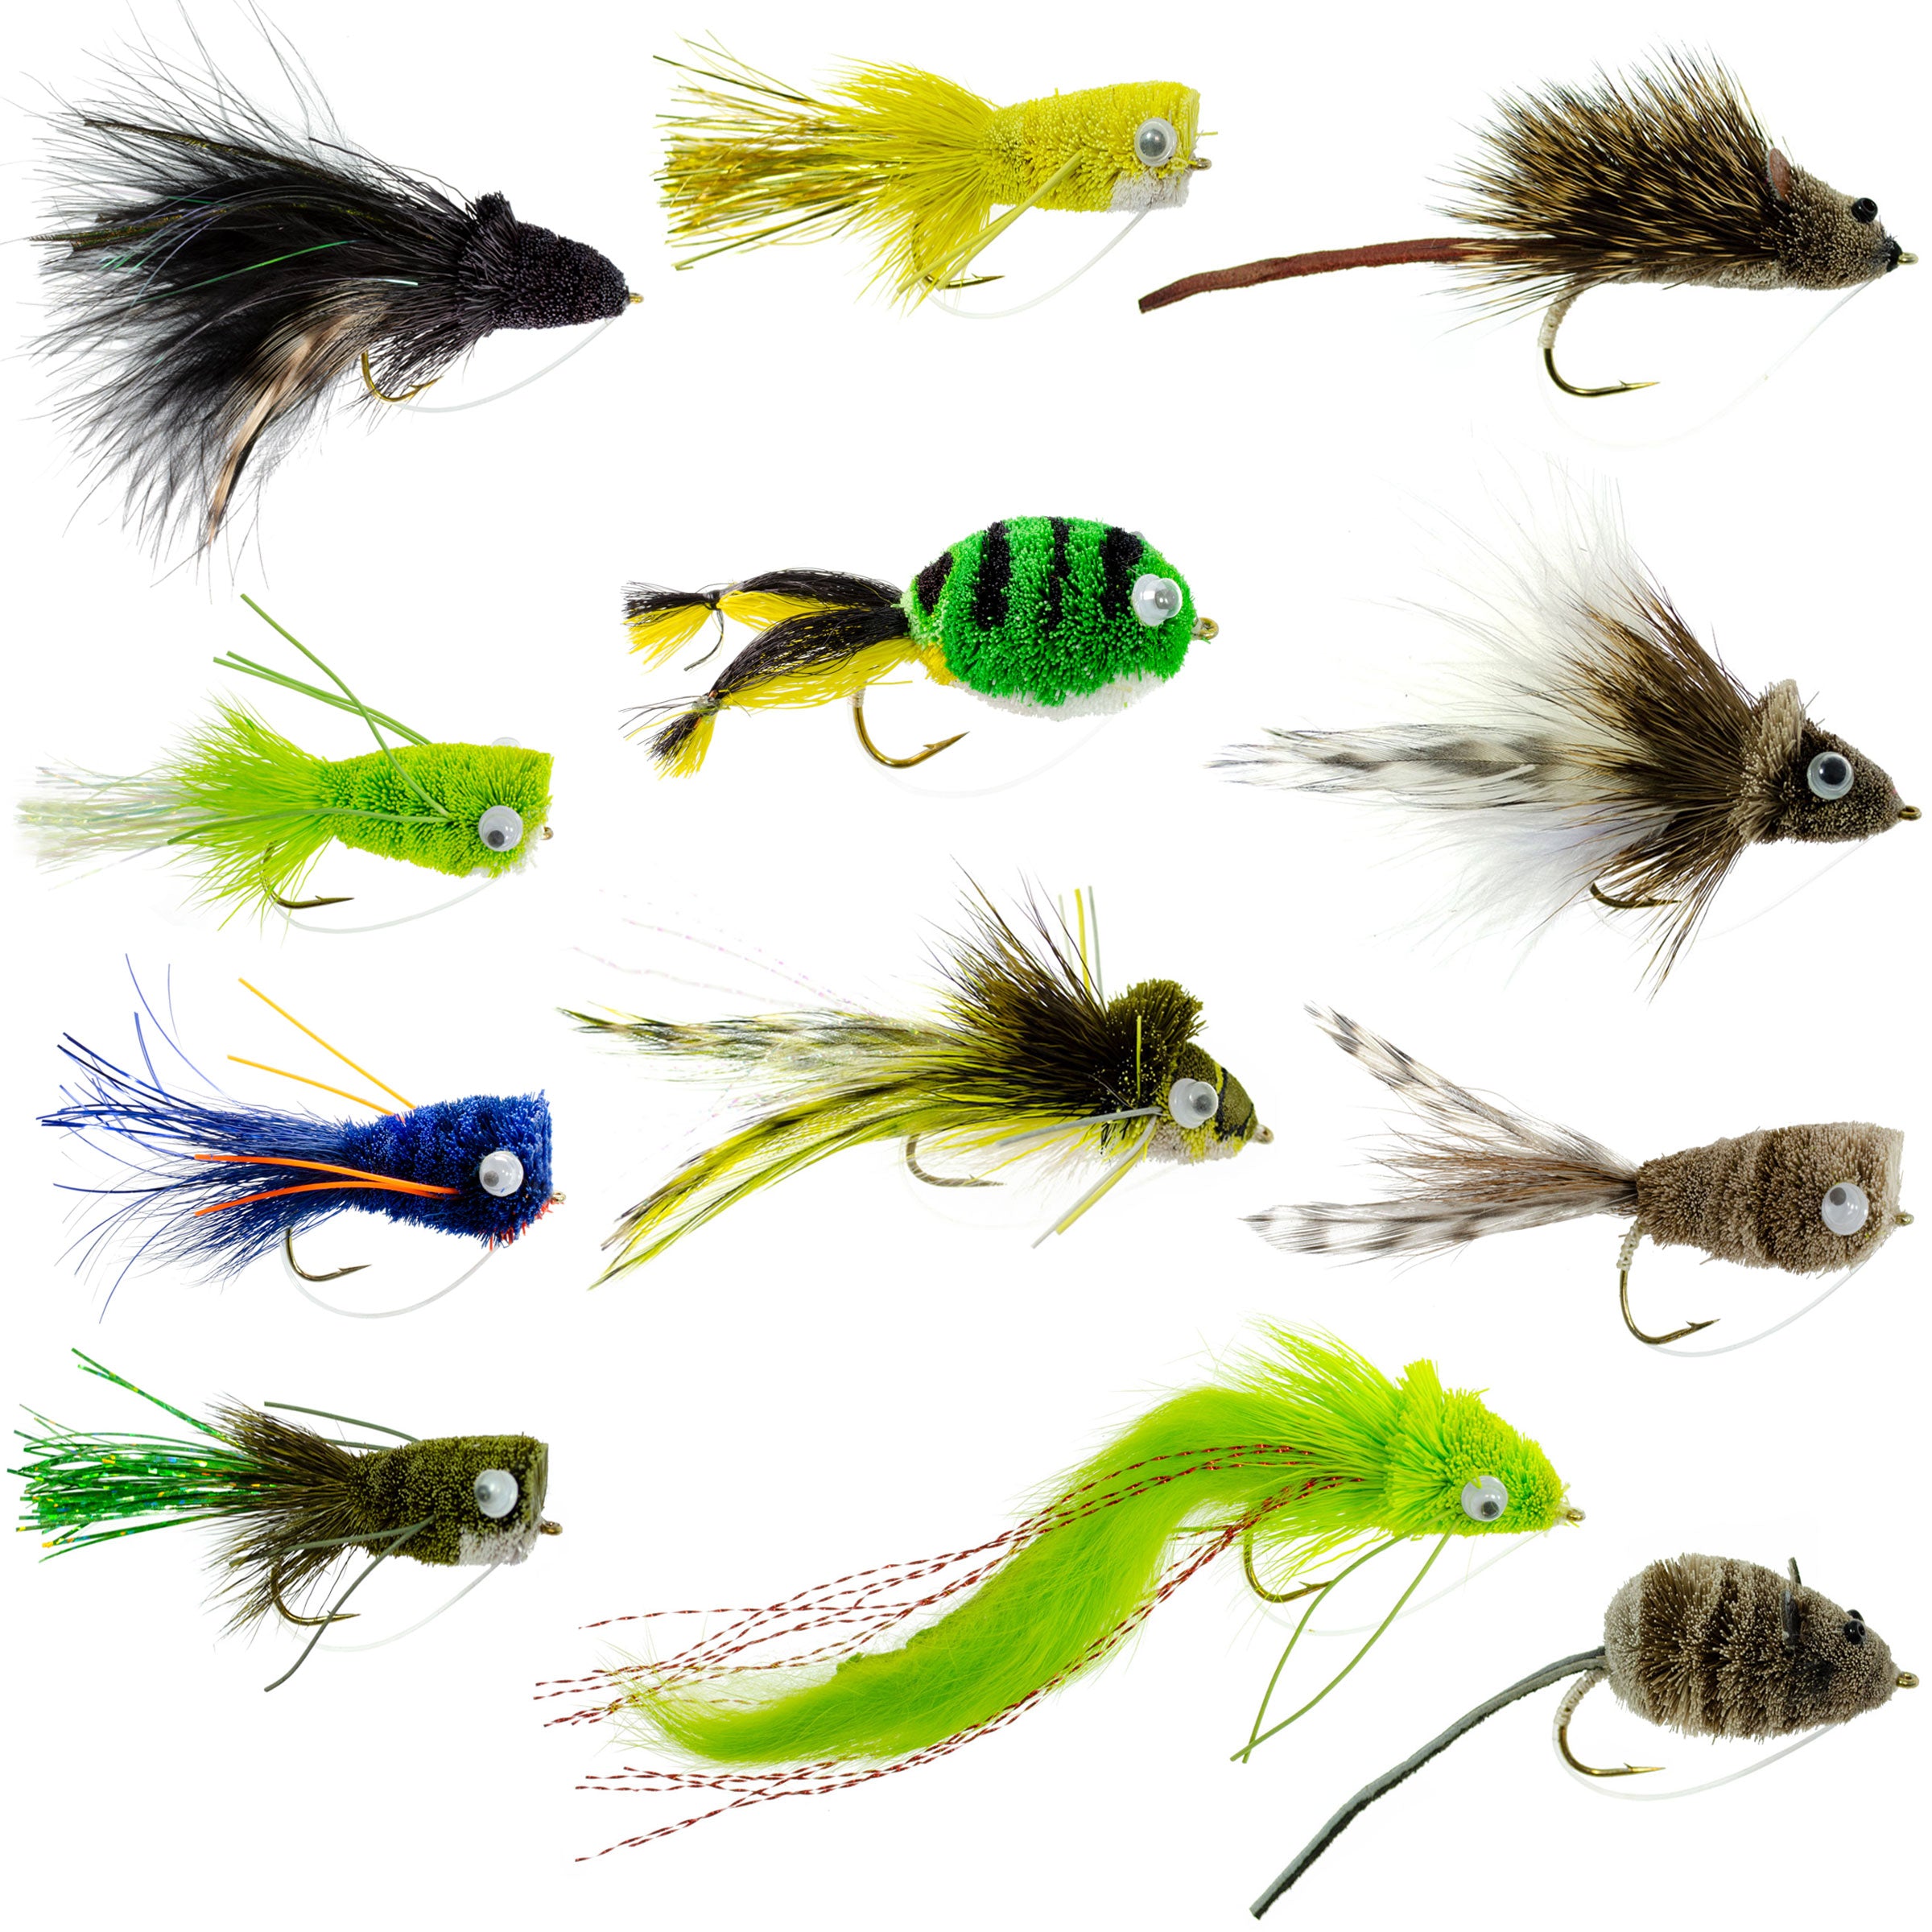 Saltwater fly fishing different fly fishing bugs in box Stock